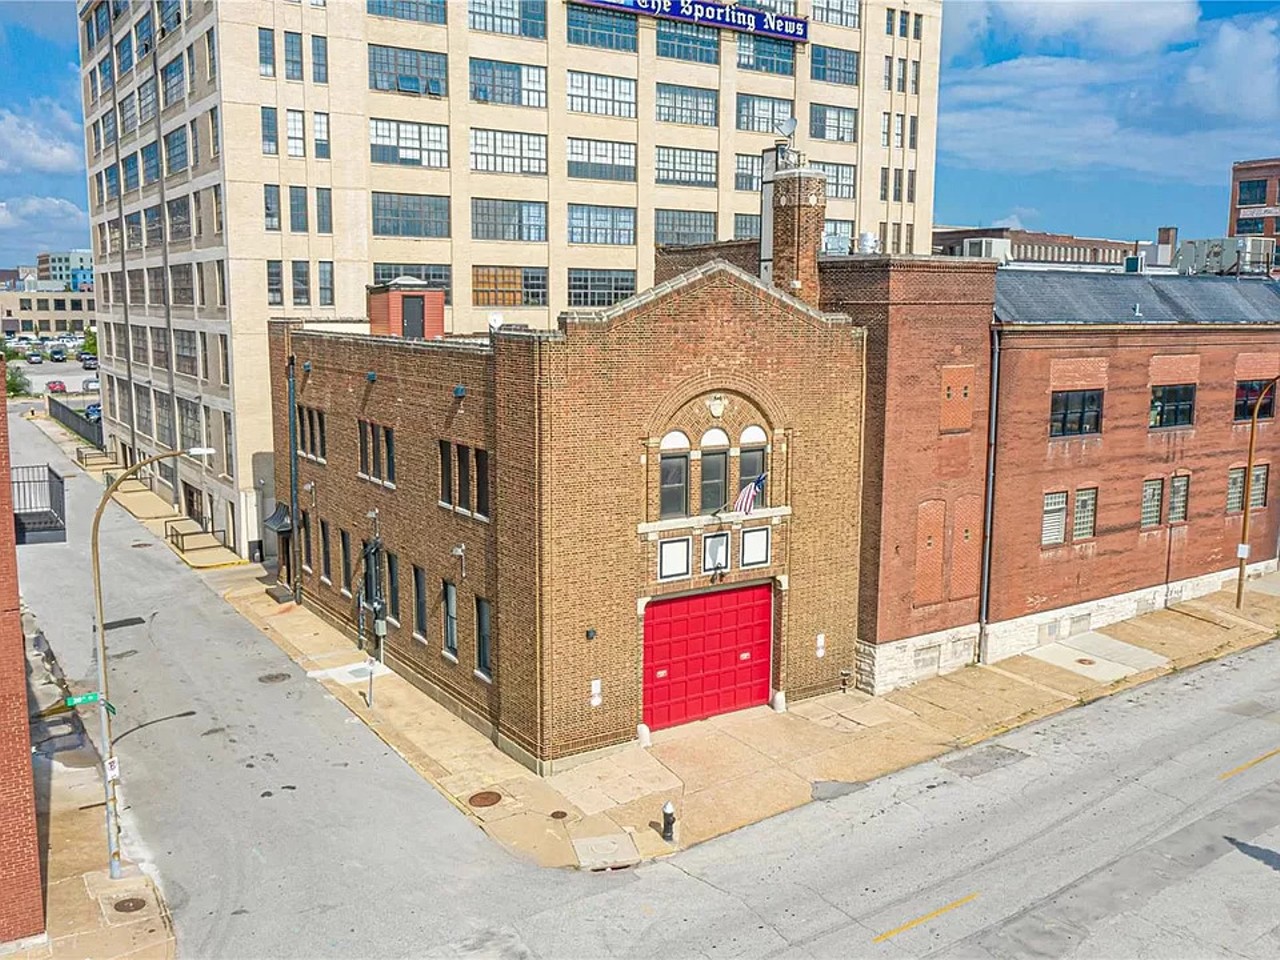 This Converted Firehouse Downtown Is a St. Louis Dream Home [PHOTOS]